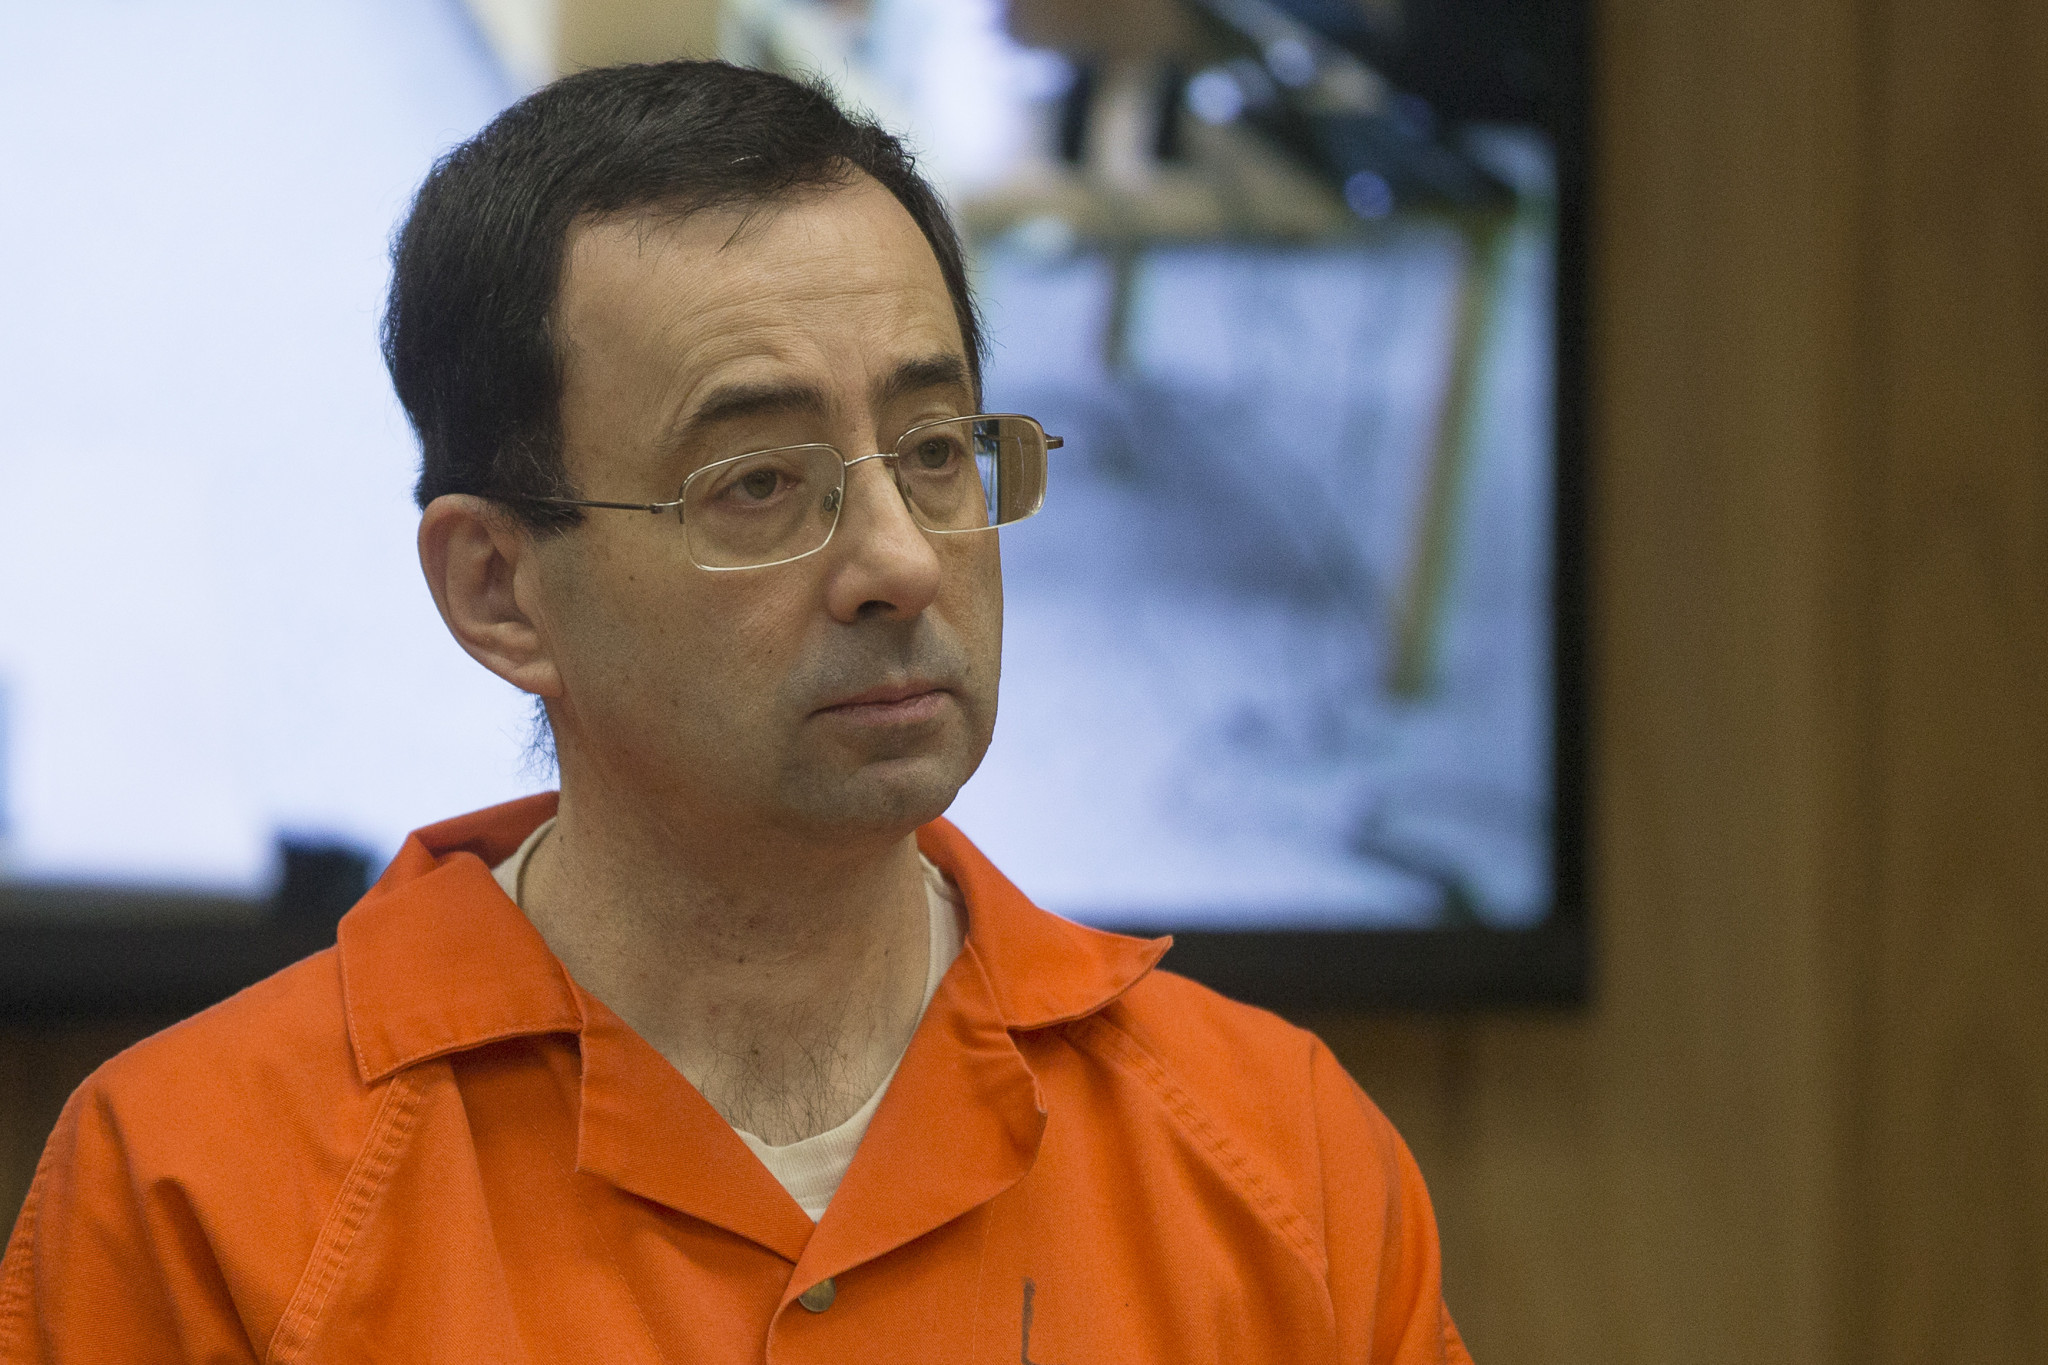 USA Gymnastics team doctor Larry Nassar has been jailed for up to 175 years after abusing young athletes ©Getty Images